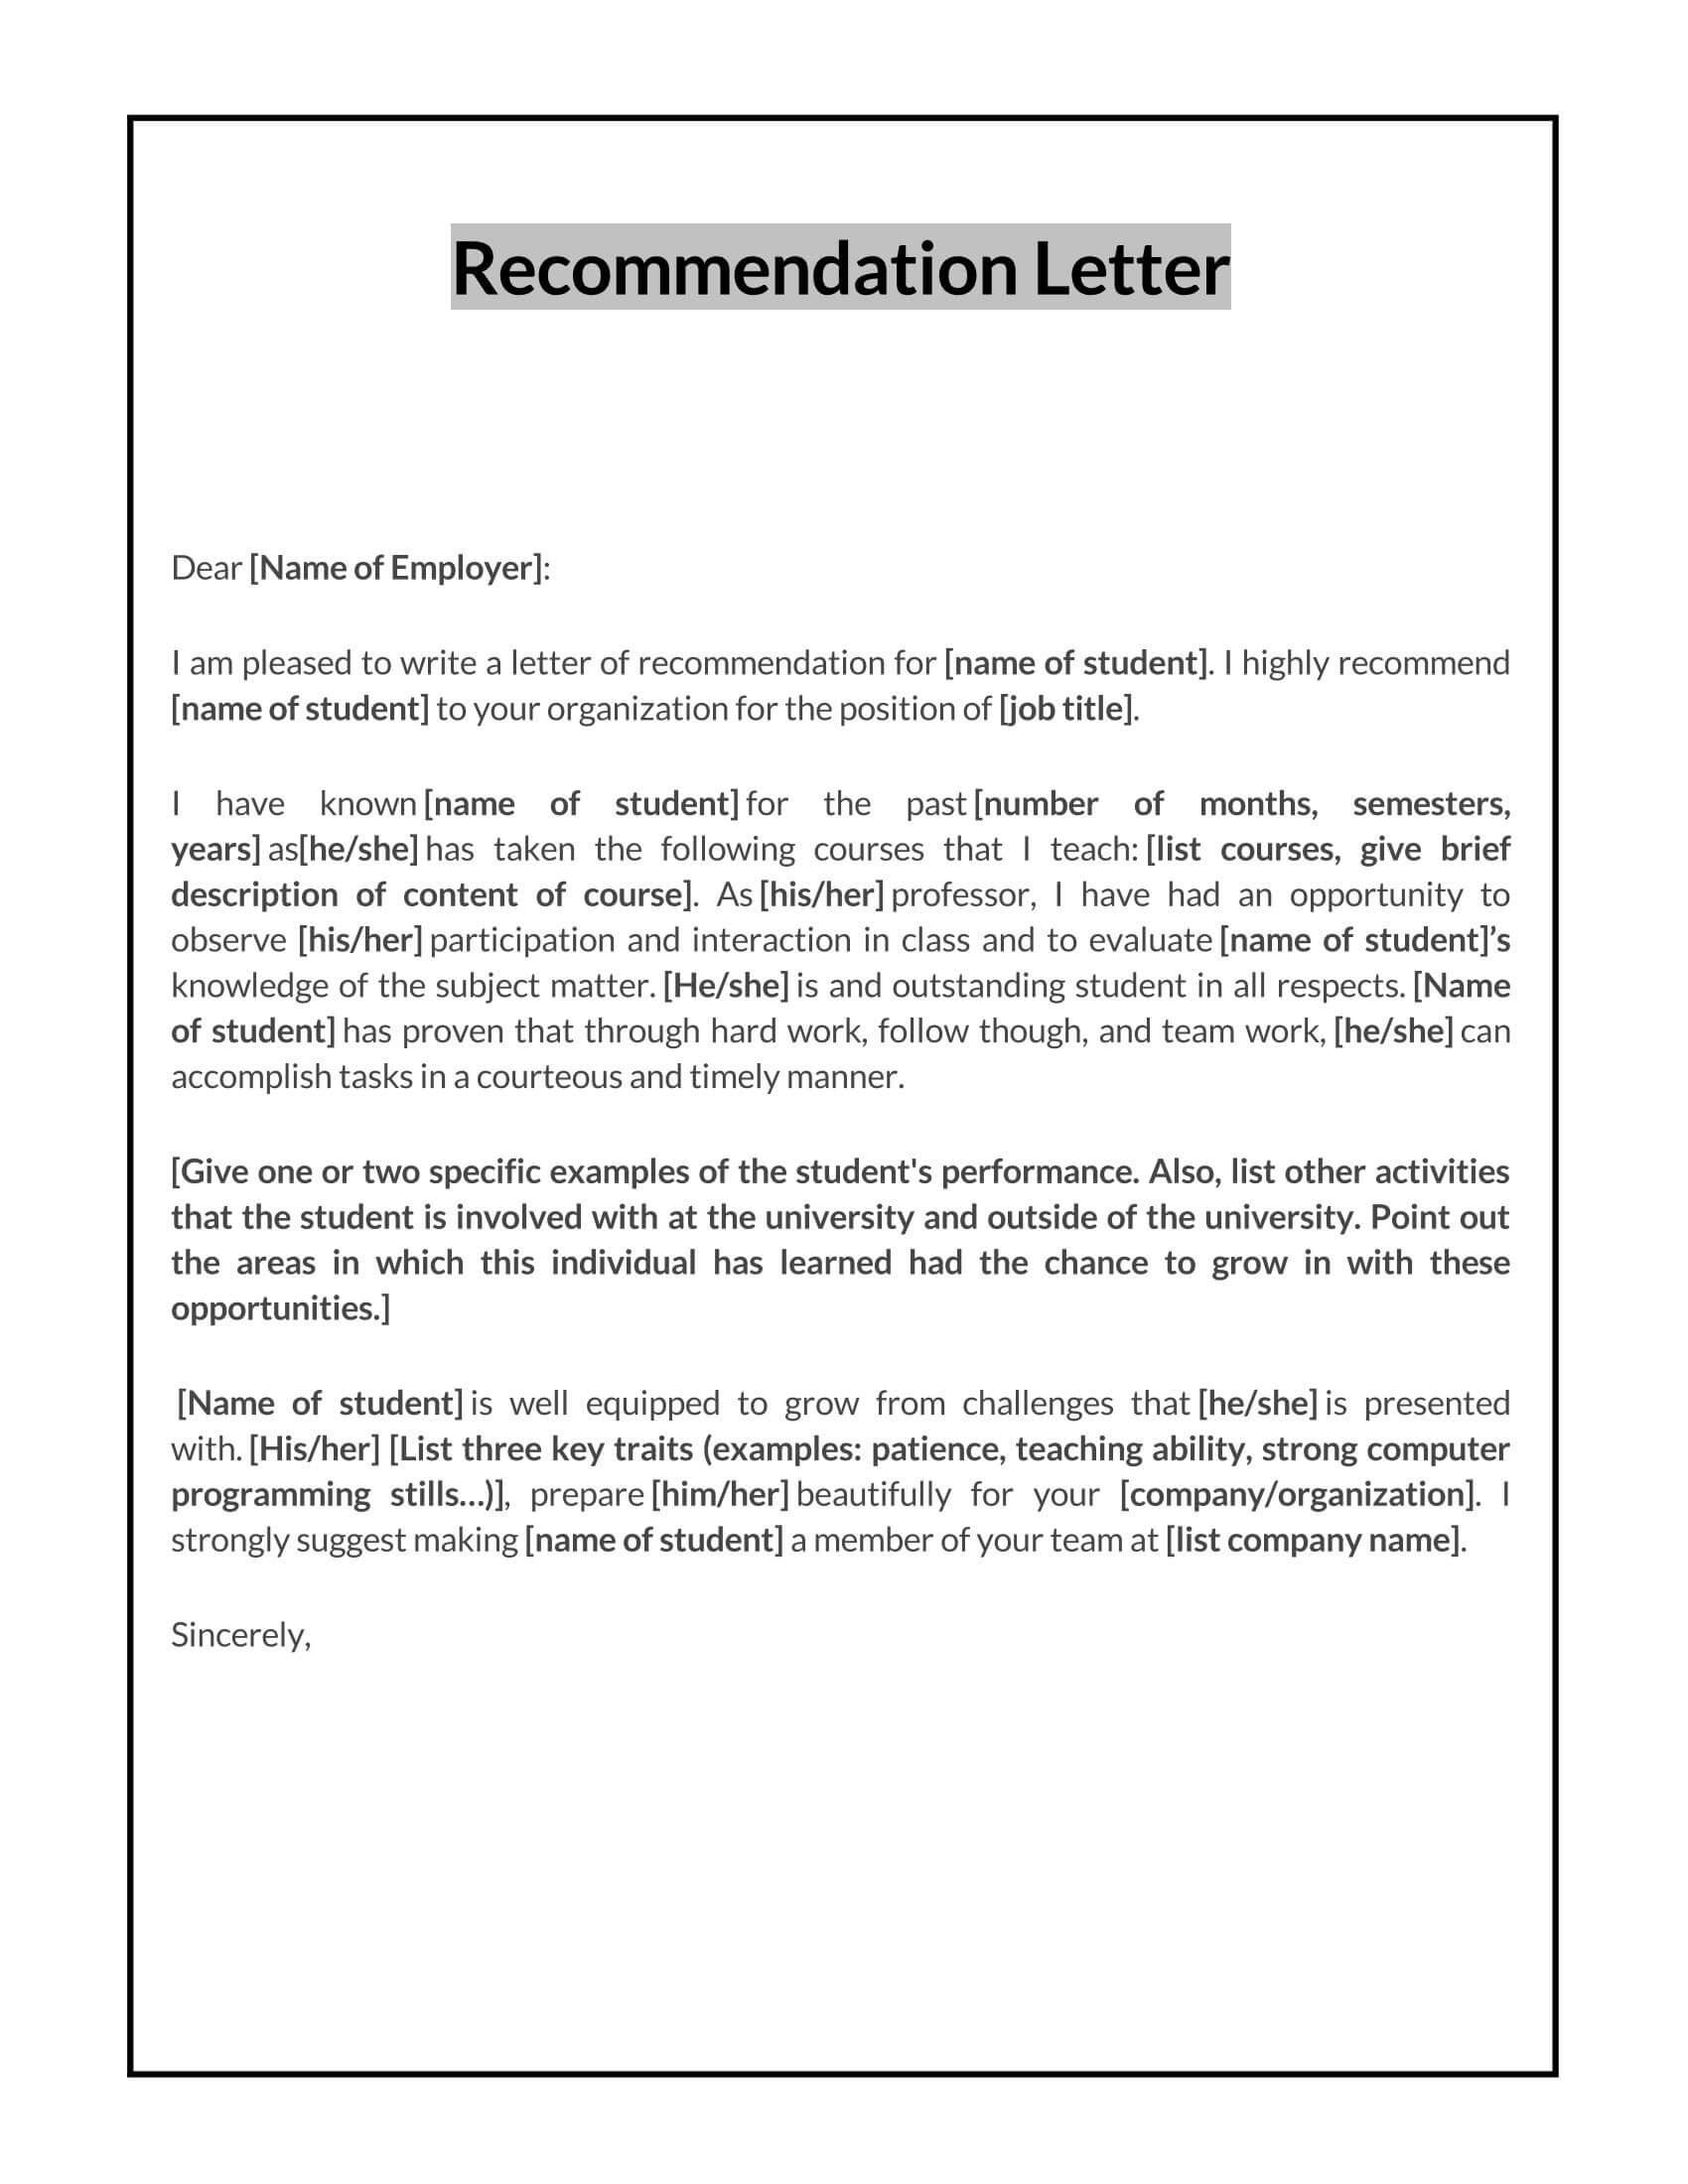 personal letter of recommendation for college student